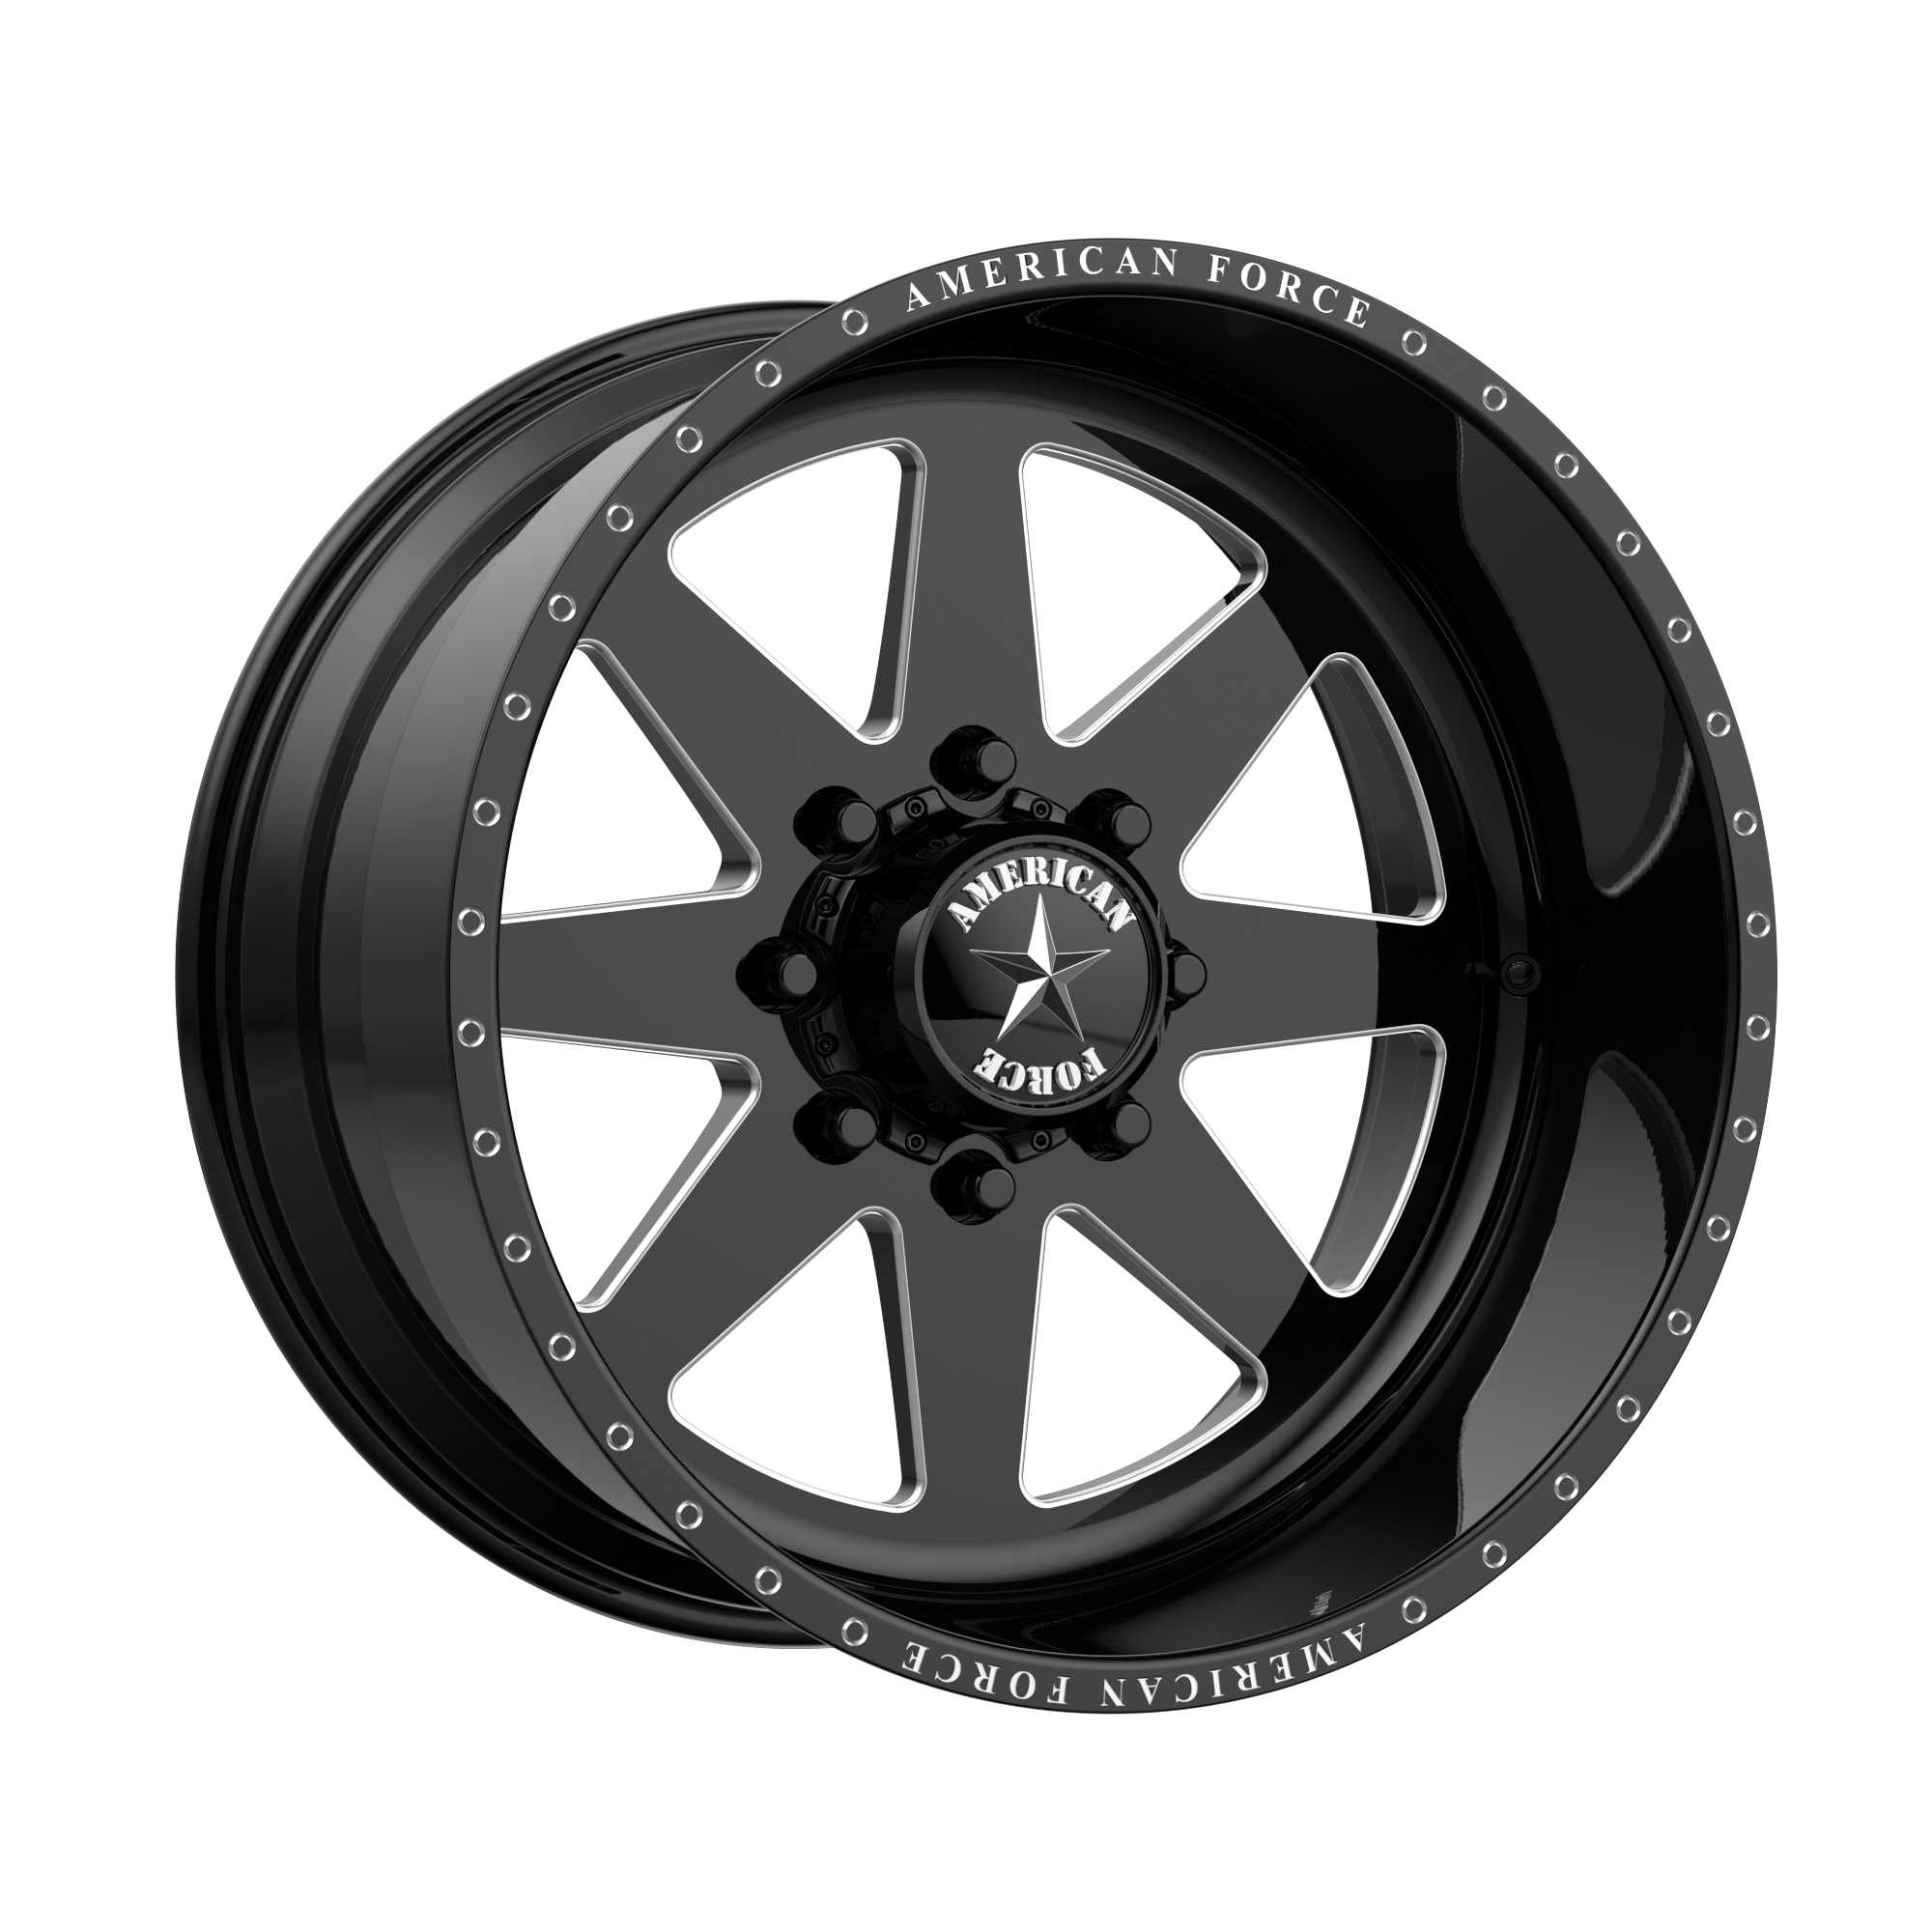 INDEPENDENCE SS 20x14 8x170.00 GLOSS BLACK MACHINED (-73 mm) - Tires and Engine Performance